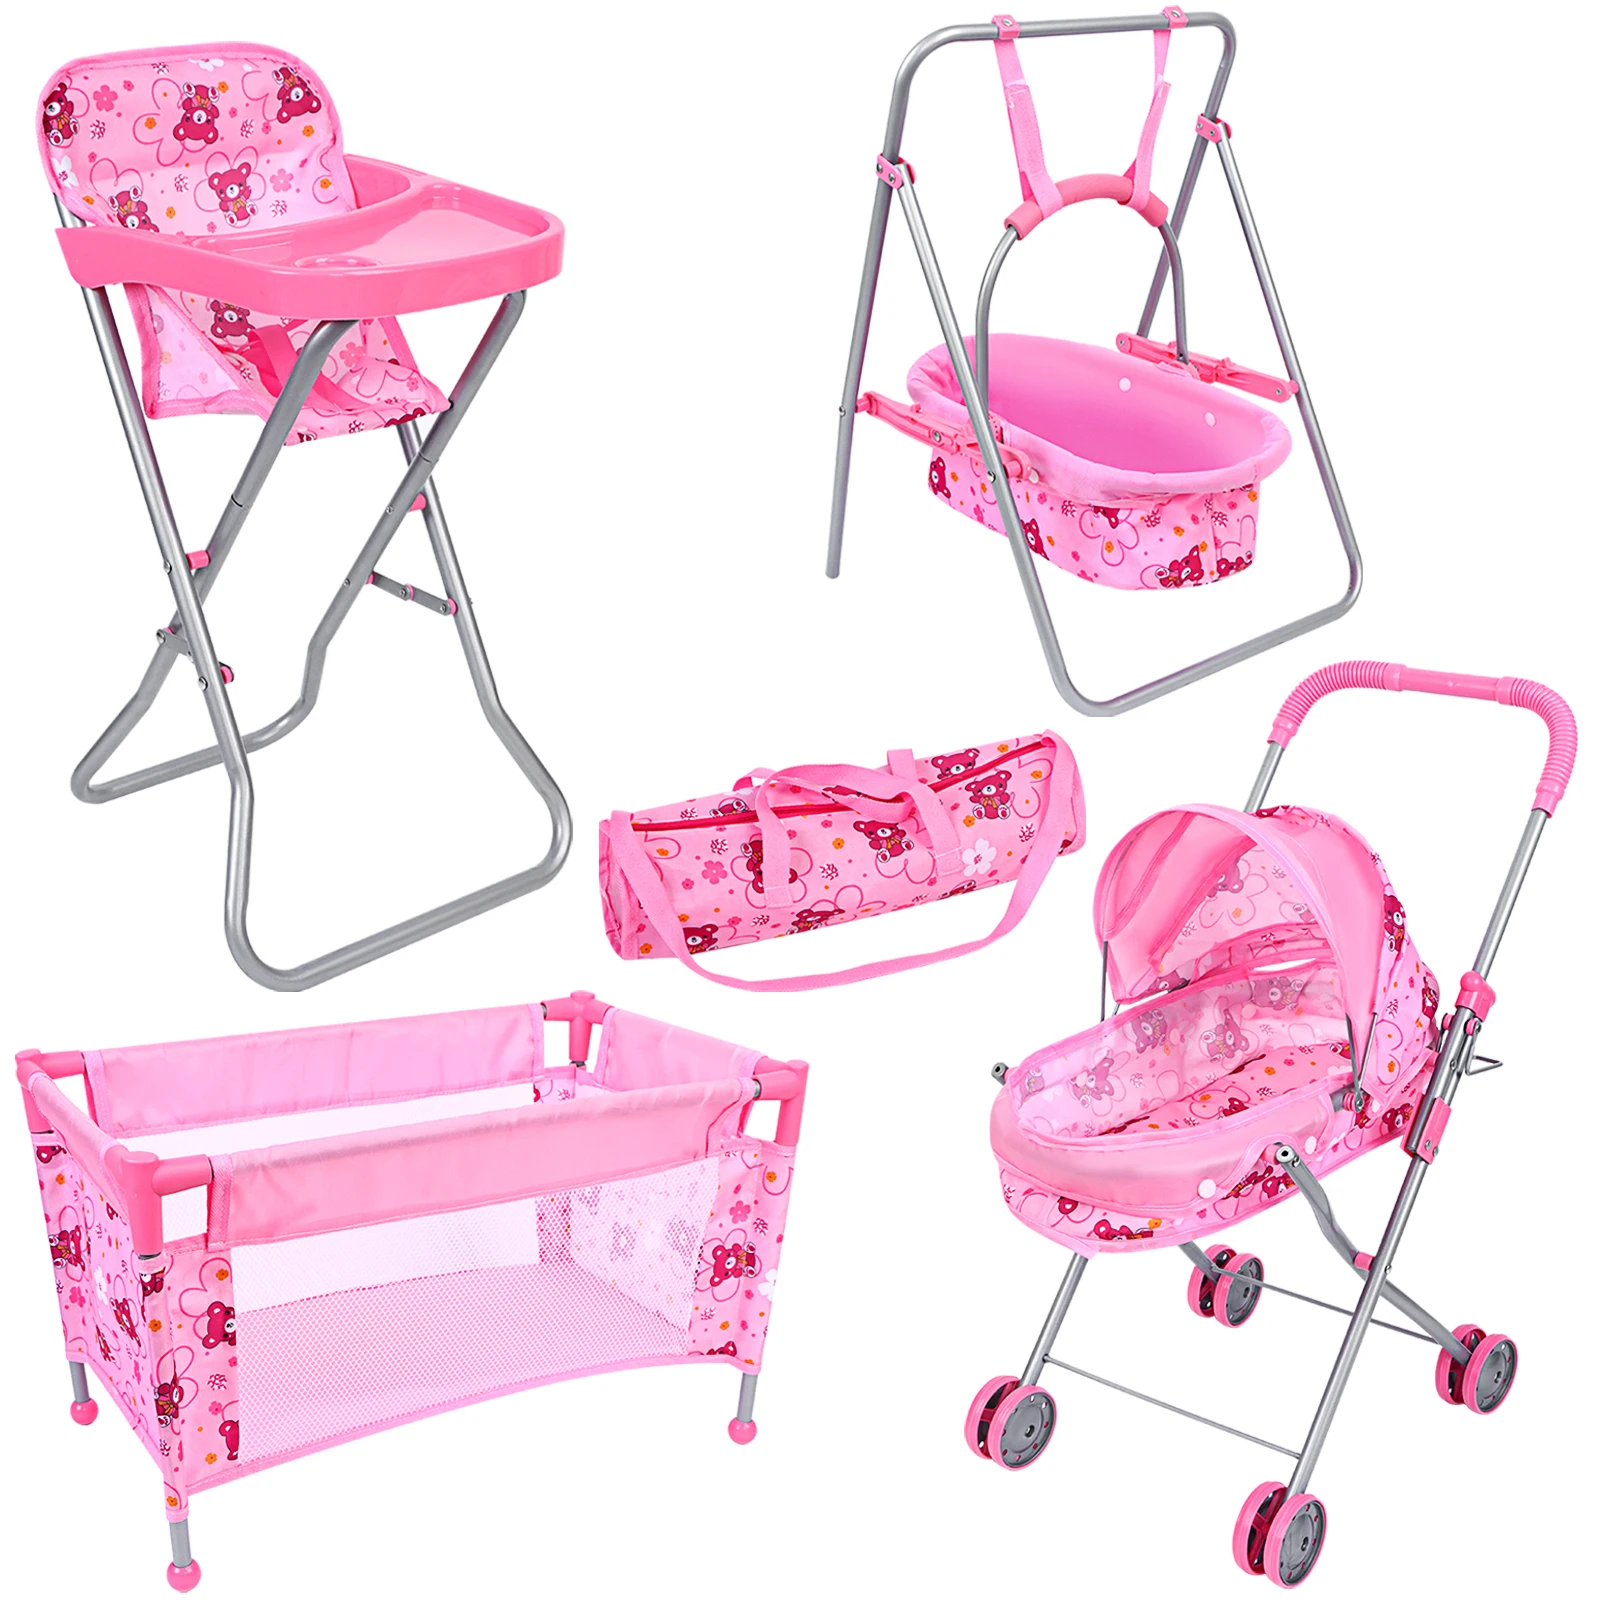 

Baby Doll Stroller Set Fits Up to 16" Dolls - 4 Pcs Deluxe Baby Doll Playset